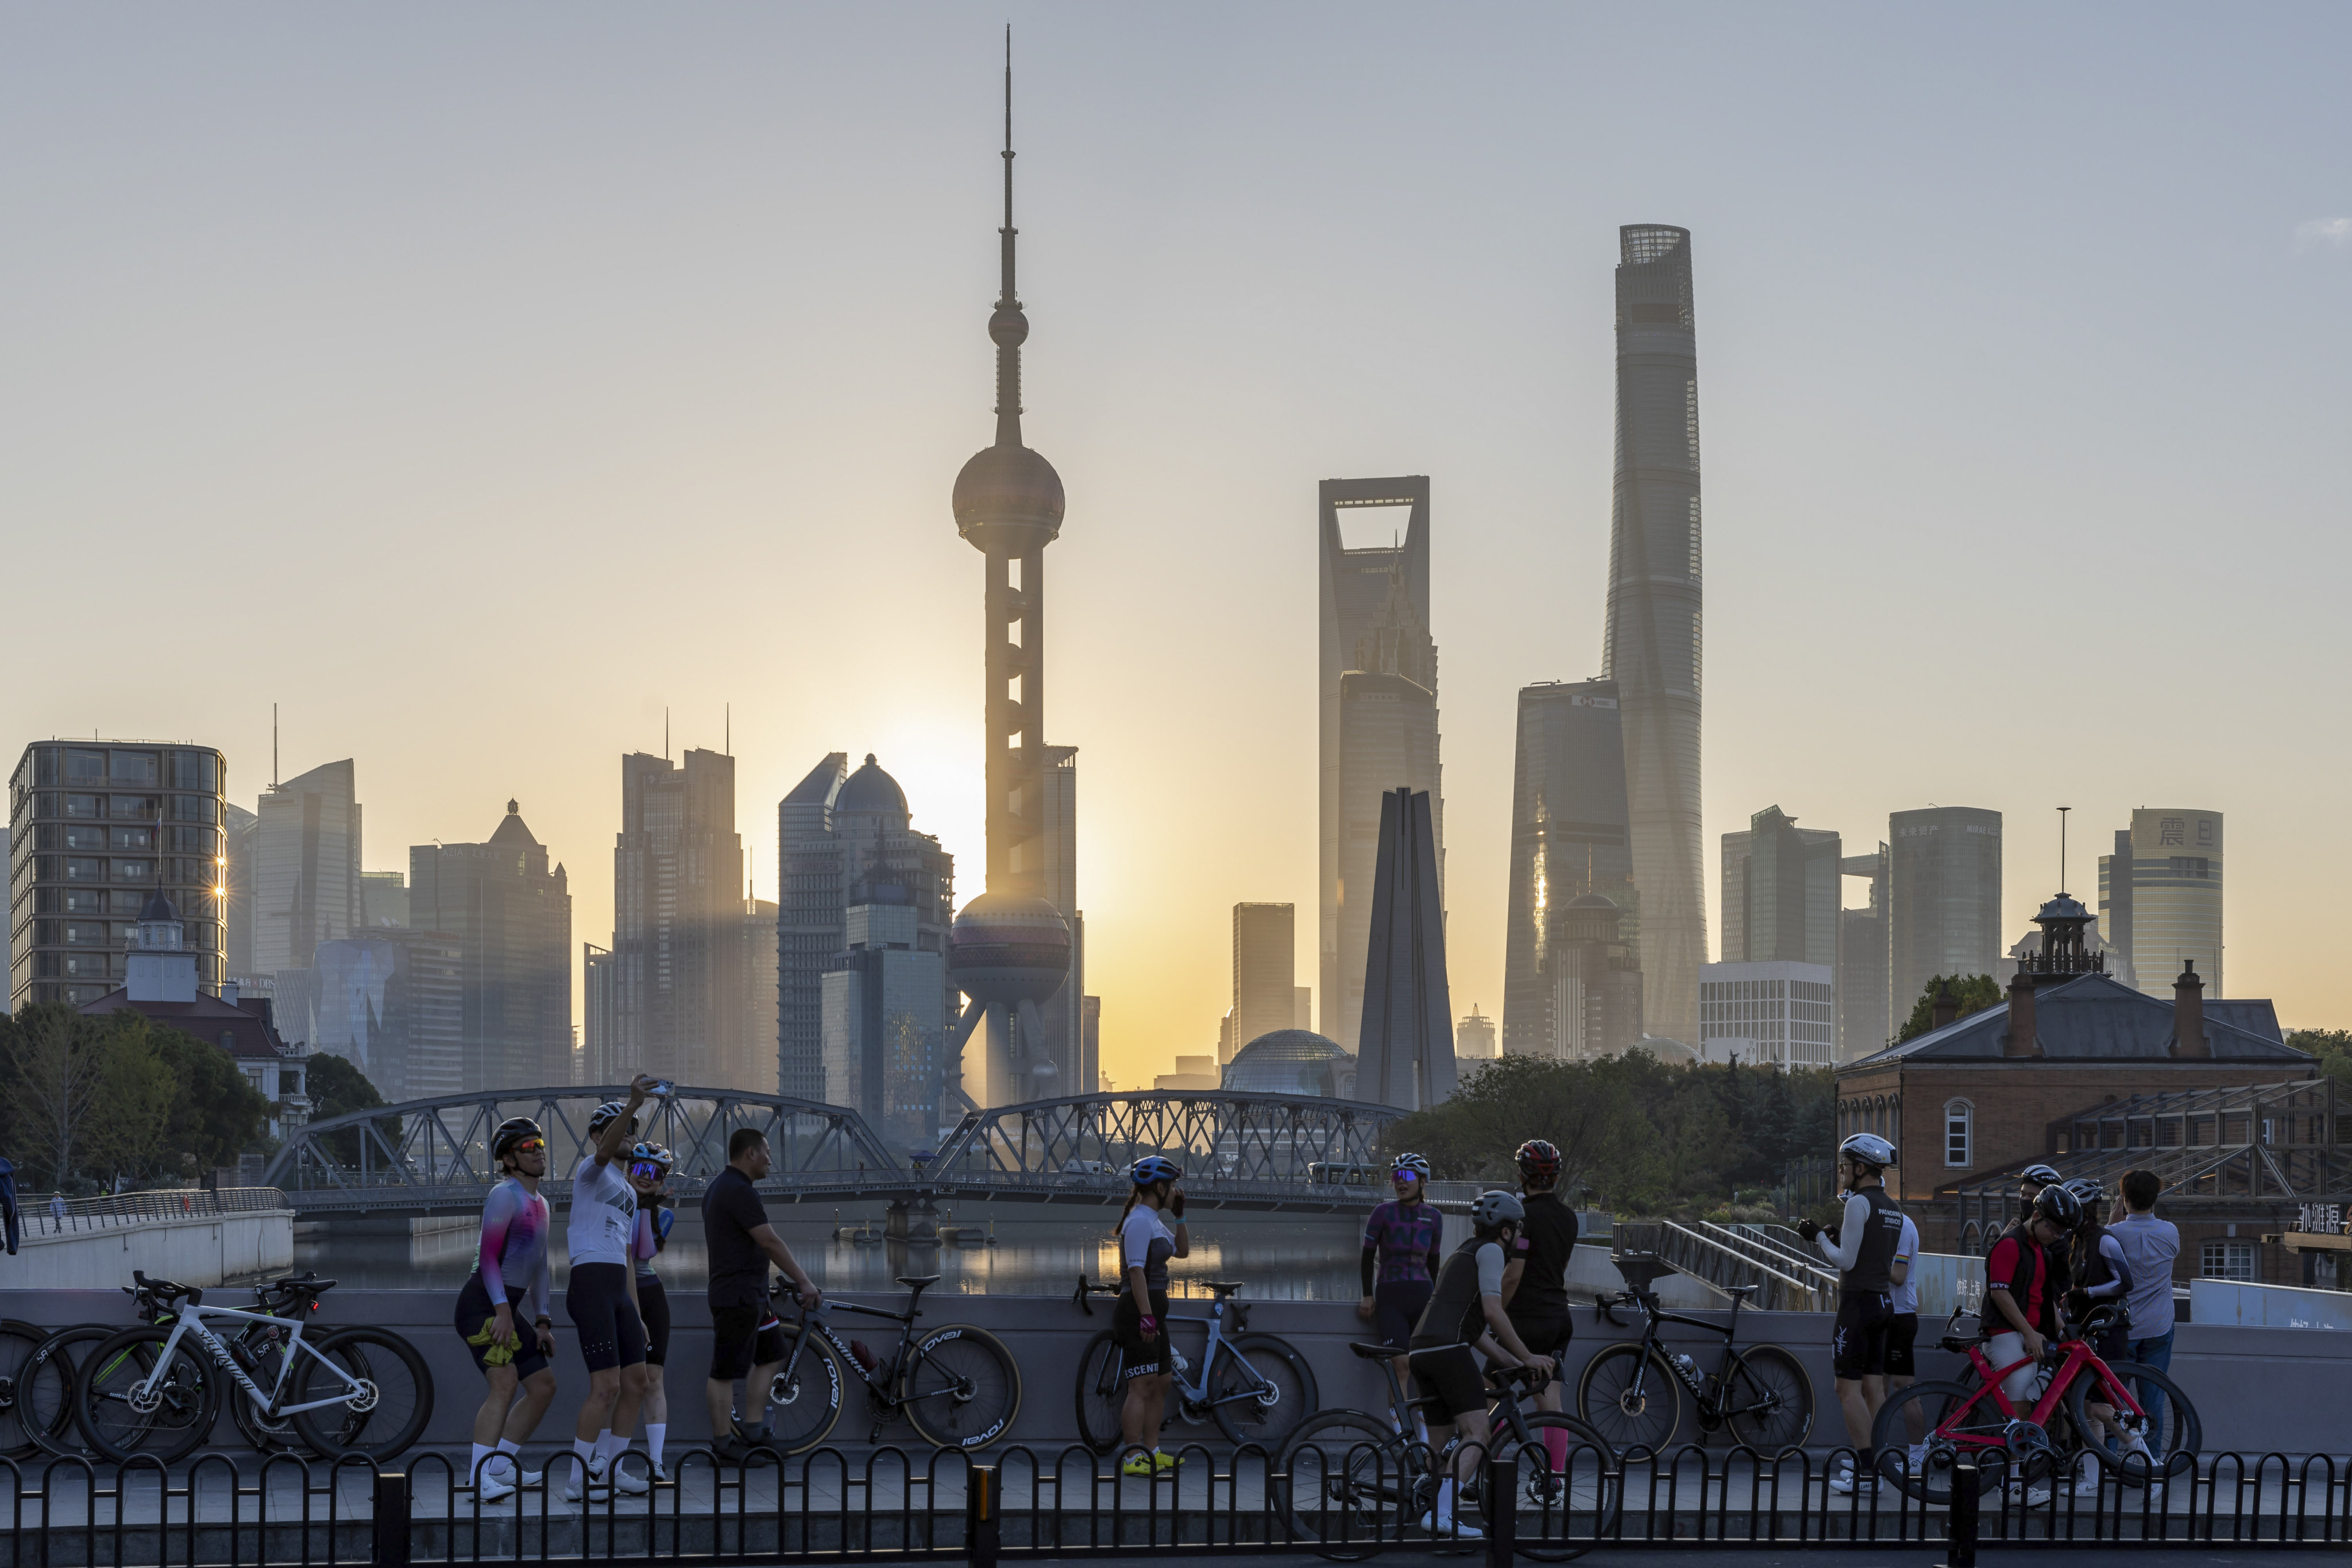 Cyclists take selfies against the backdrop of sunlit skylines in Pudong, China’s financial and commercial hub, in Shanghai, China. Photo: Xinhua via AP